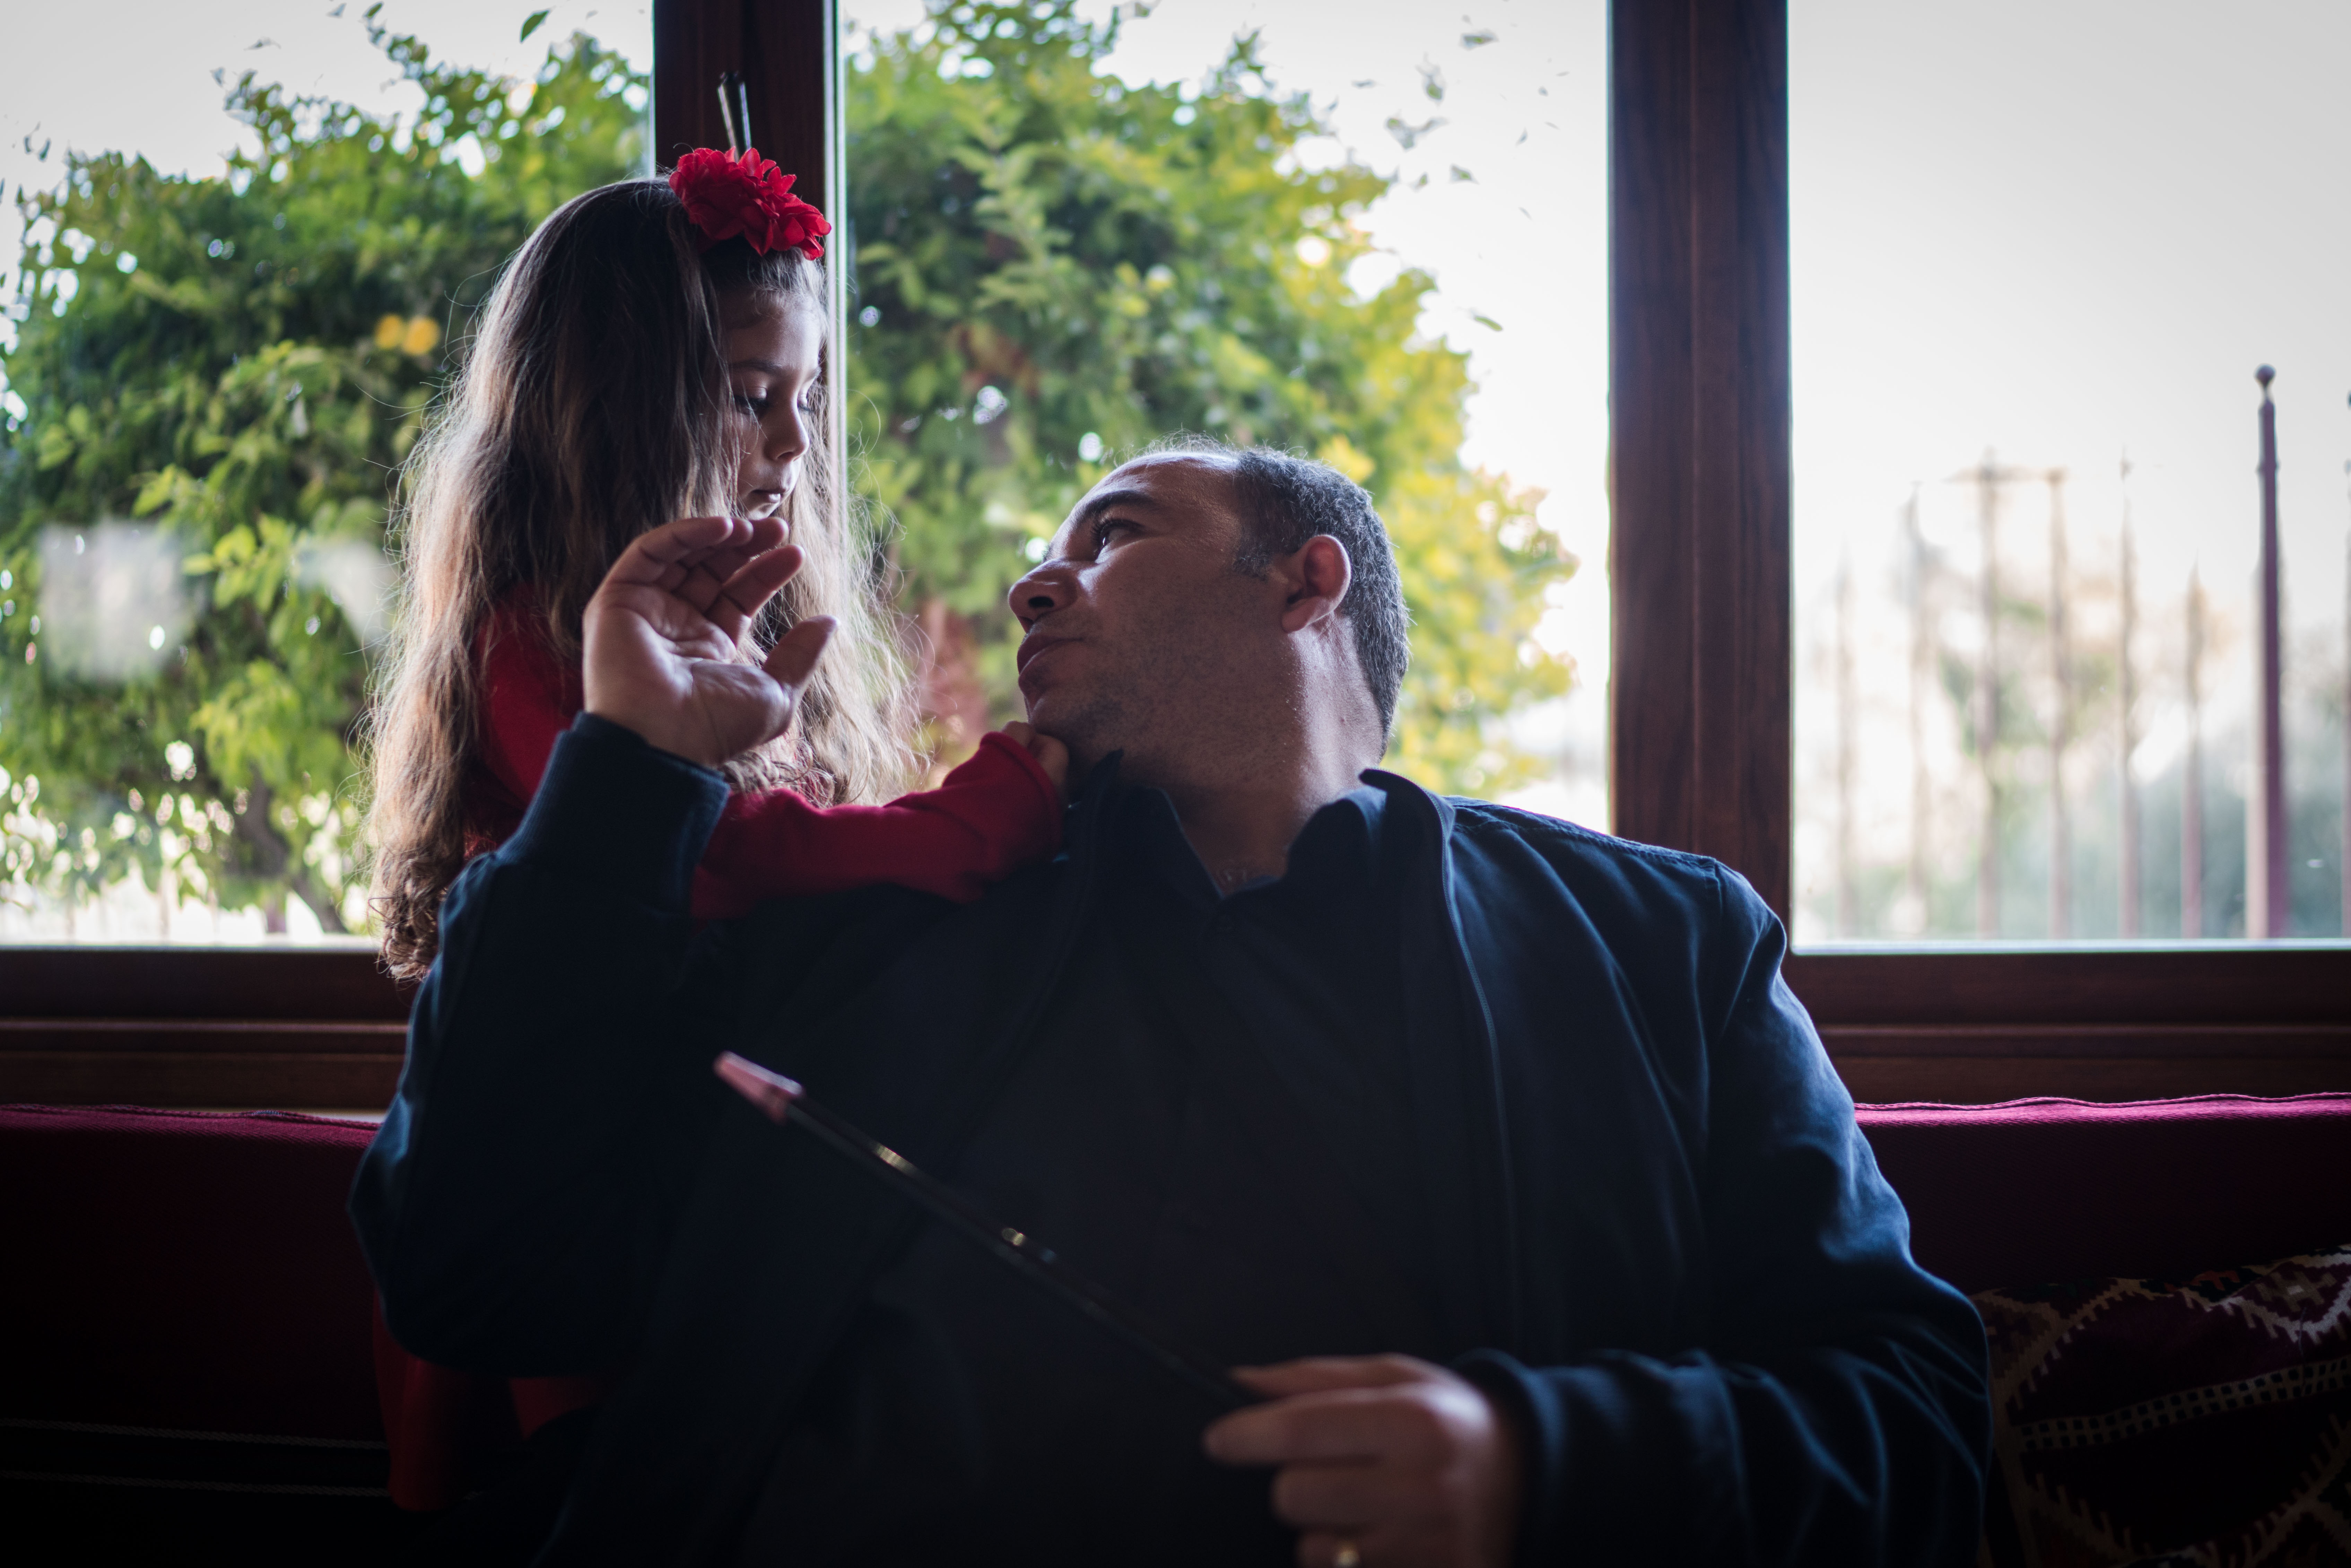 George Antone shares a moment with his daughter during their Christmas lunch in Bethlehem on December 25, 2018.